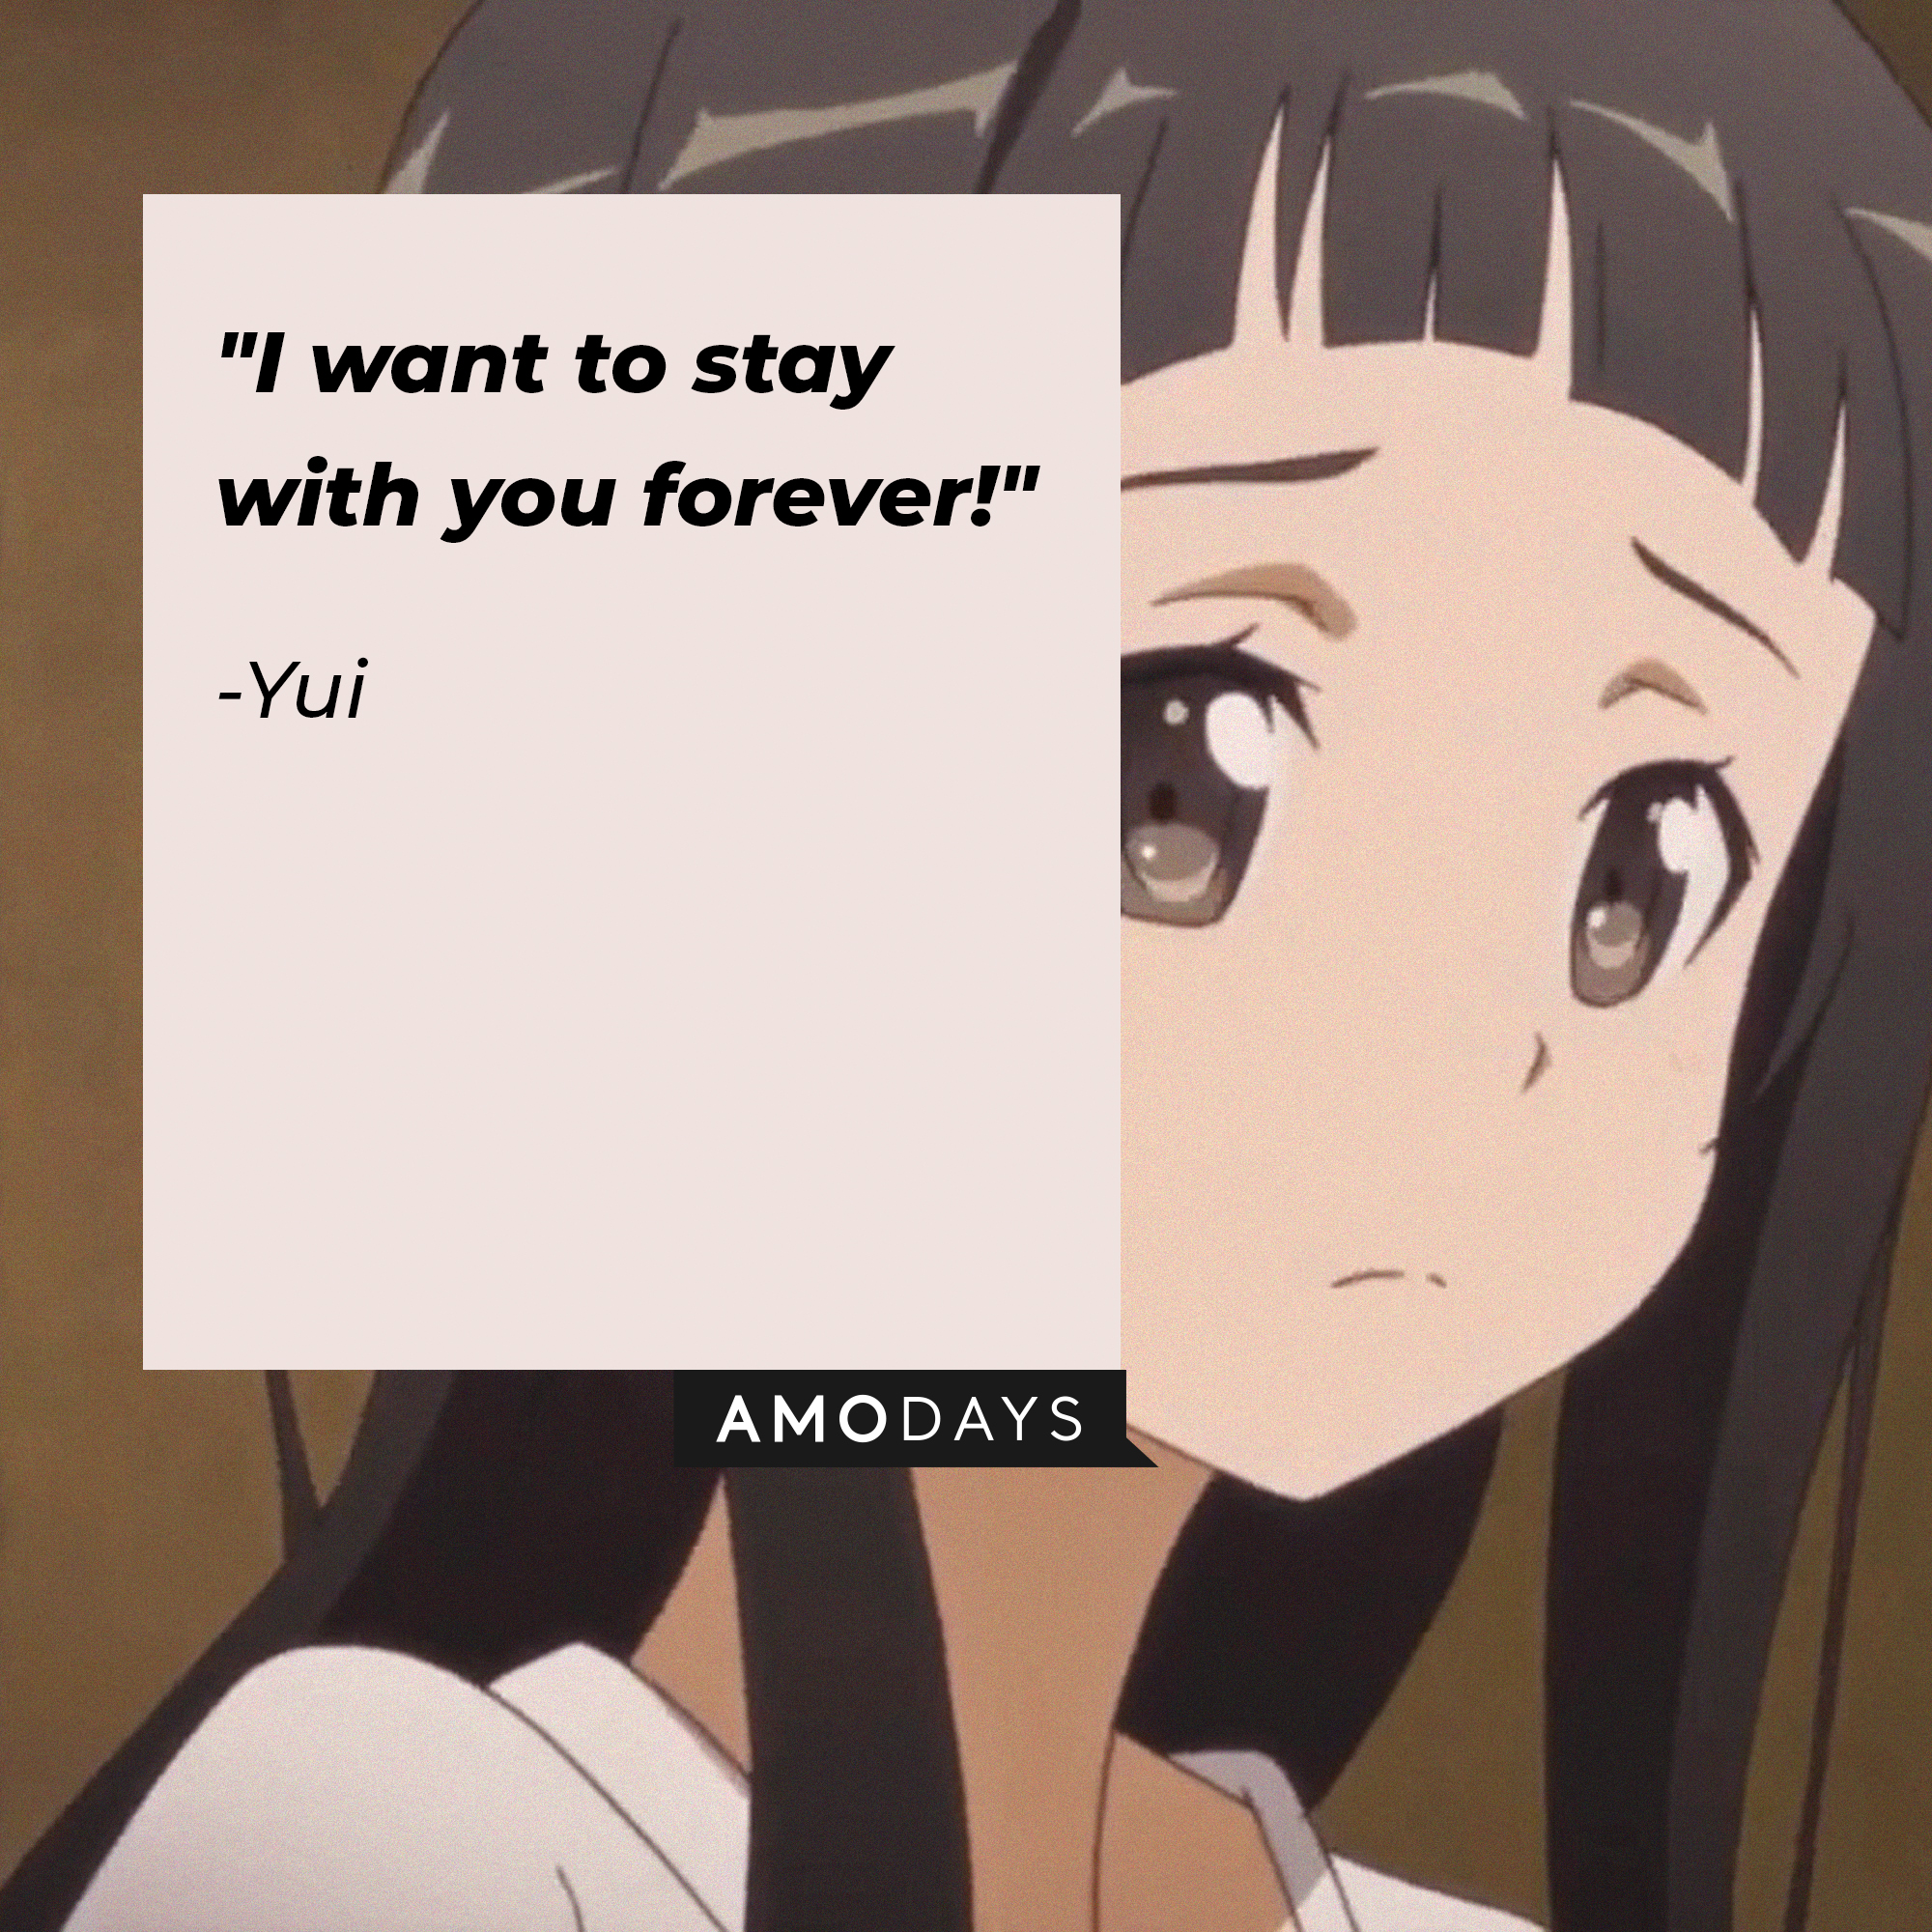 Yui's quote: "I want to stay with you forever!" | Source: Facebook.com/SwordArtOnlineUSA